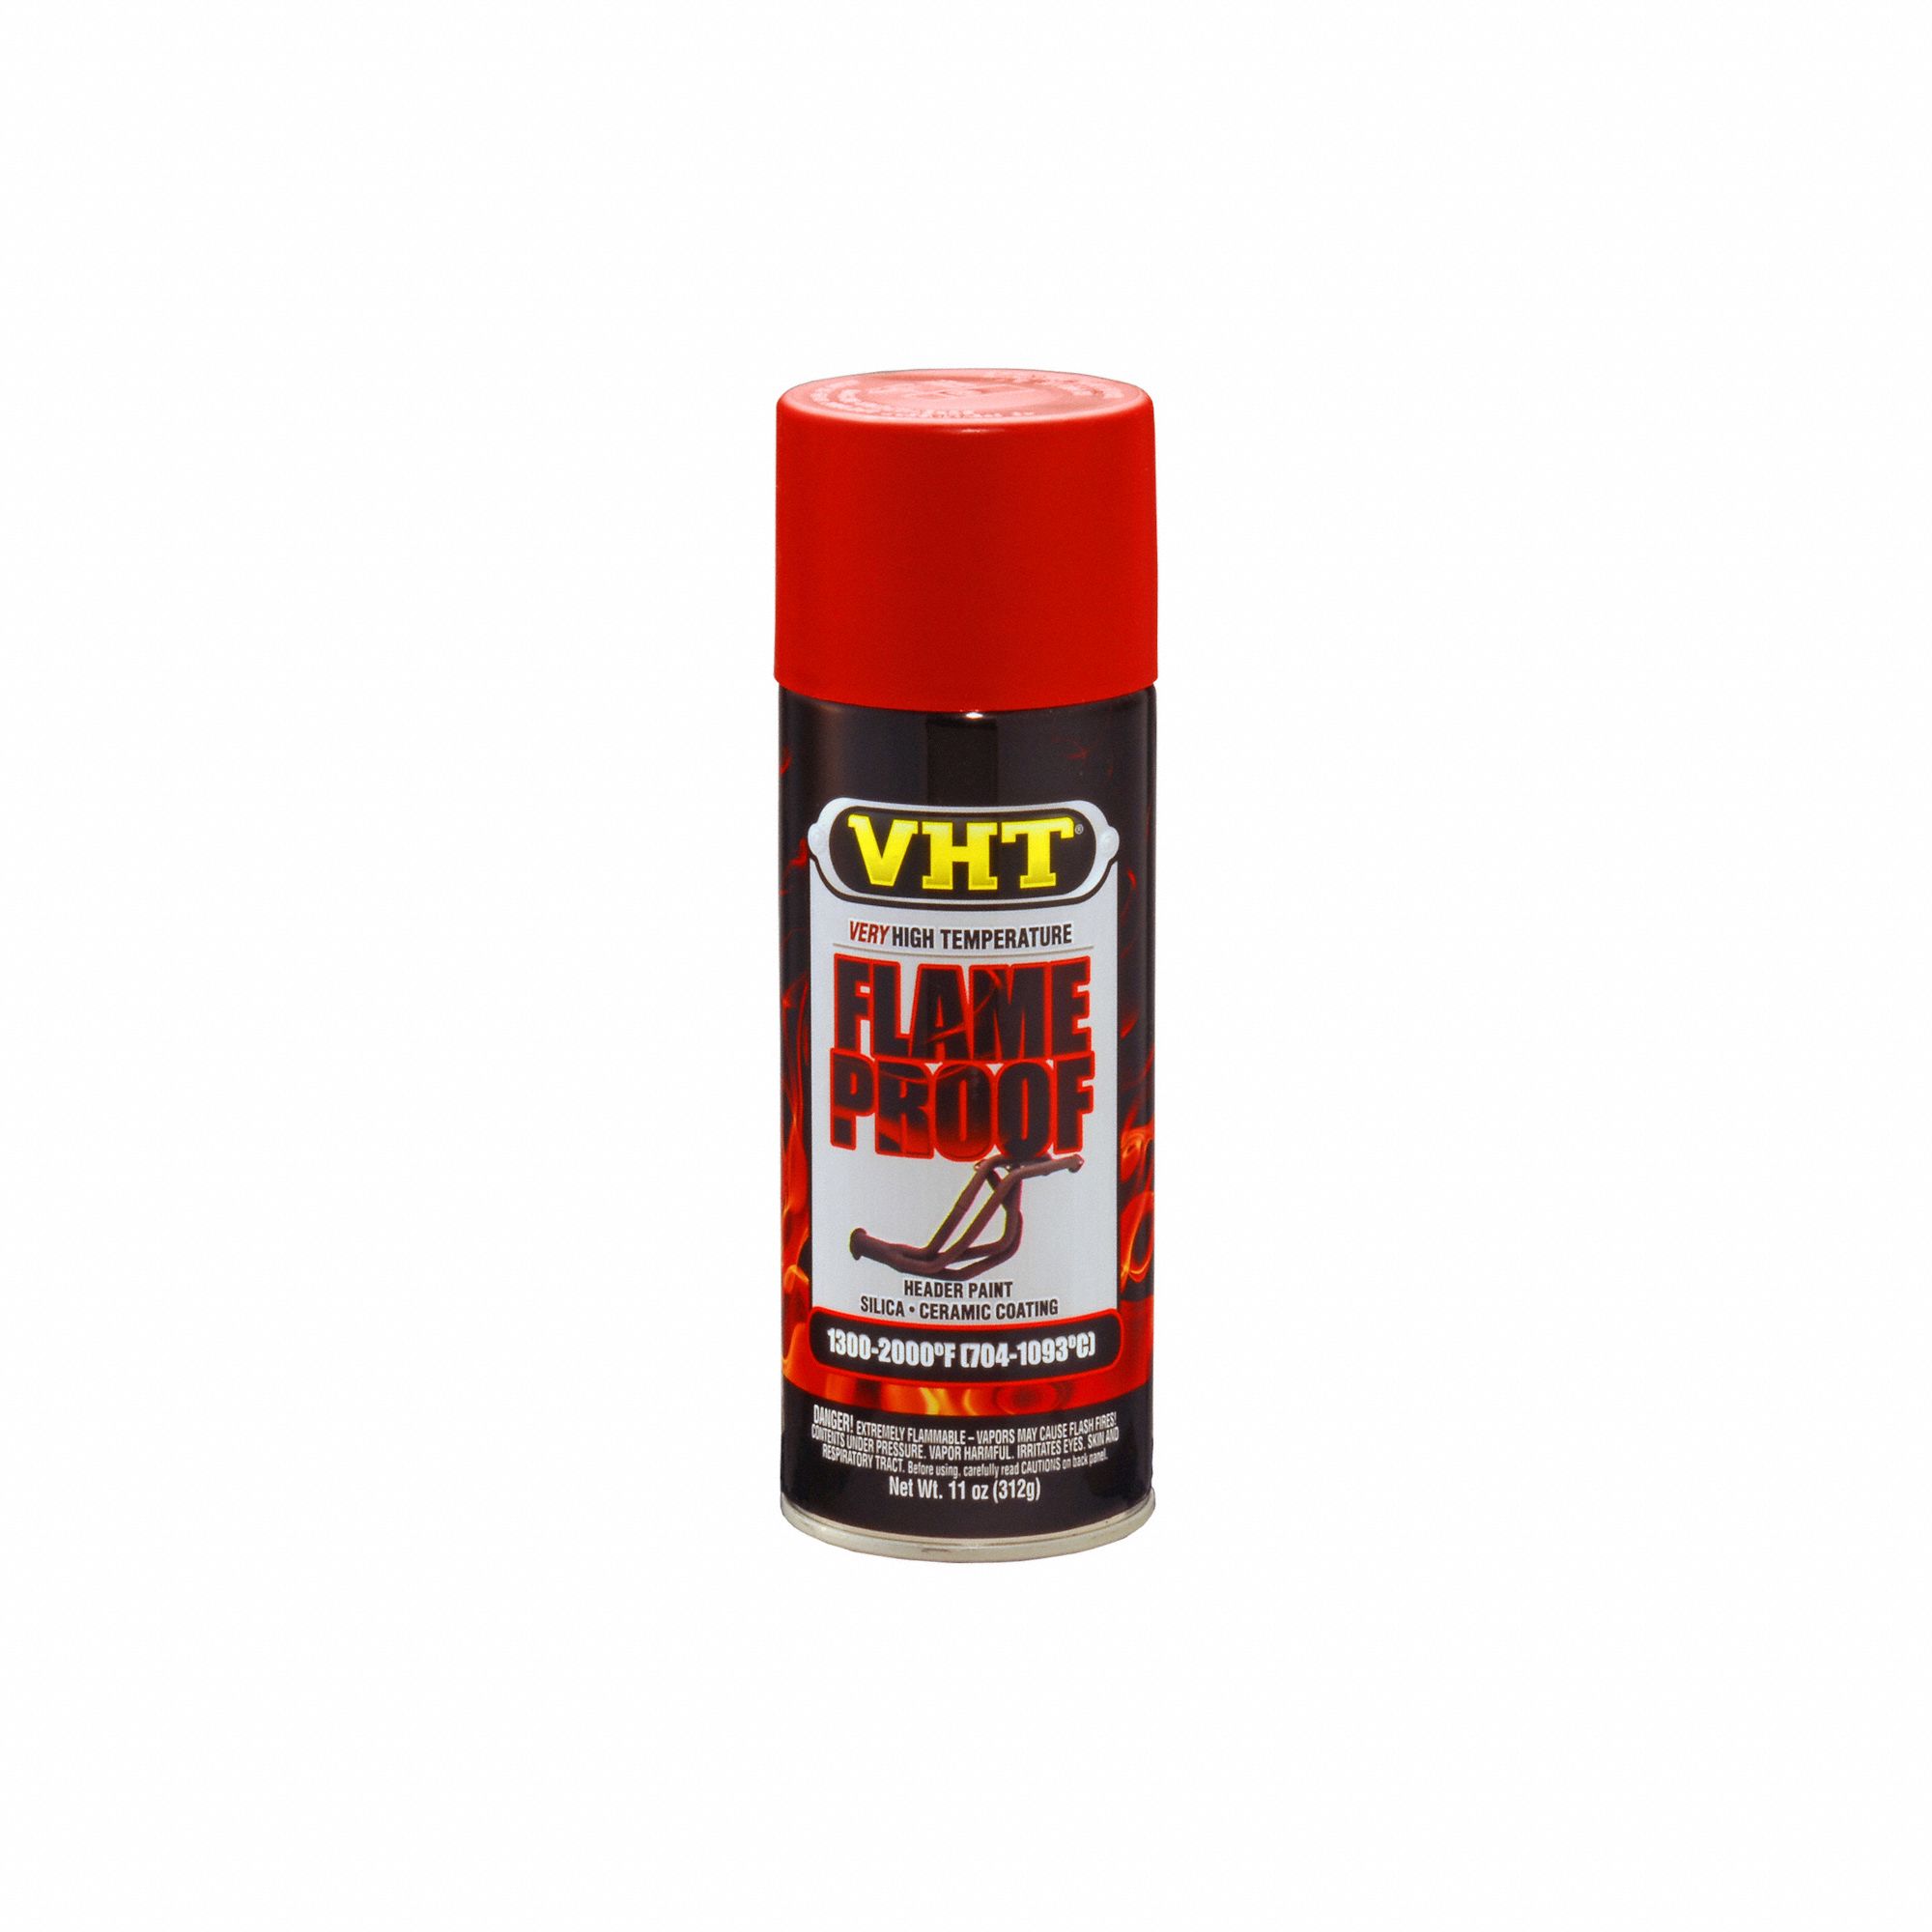 Flameproof Coating: Metal/Steel, Solvent, Red, 11 oz Container, Flameproof